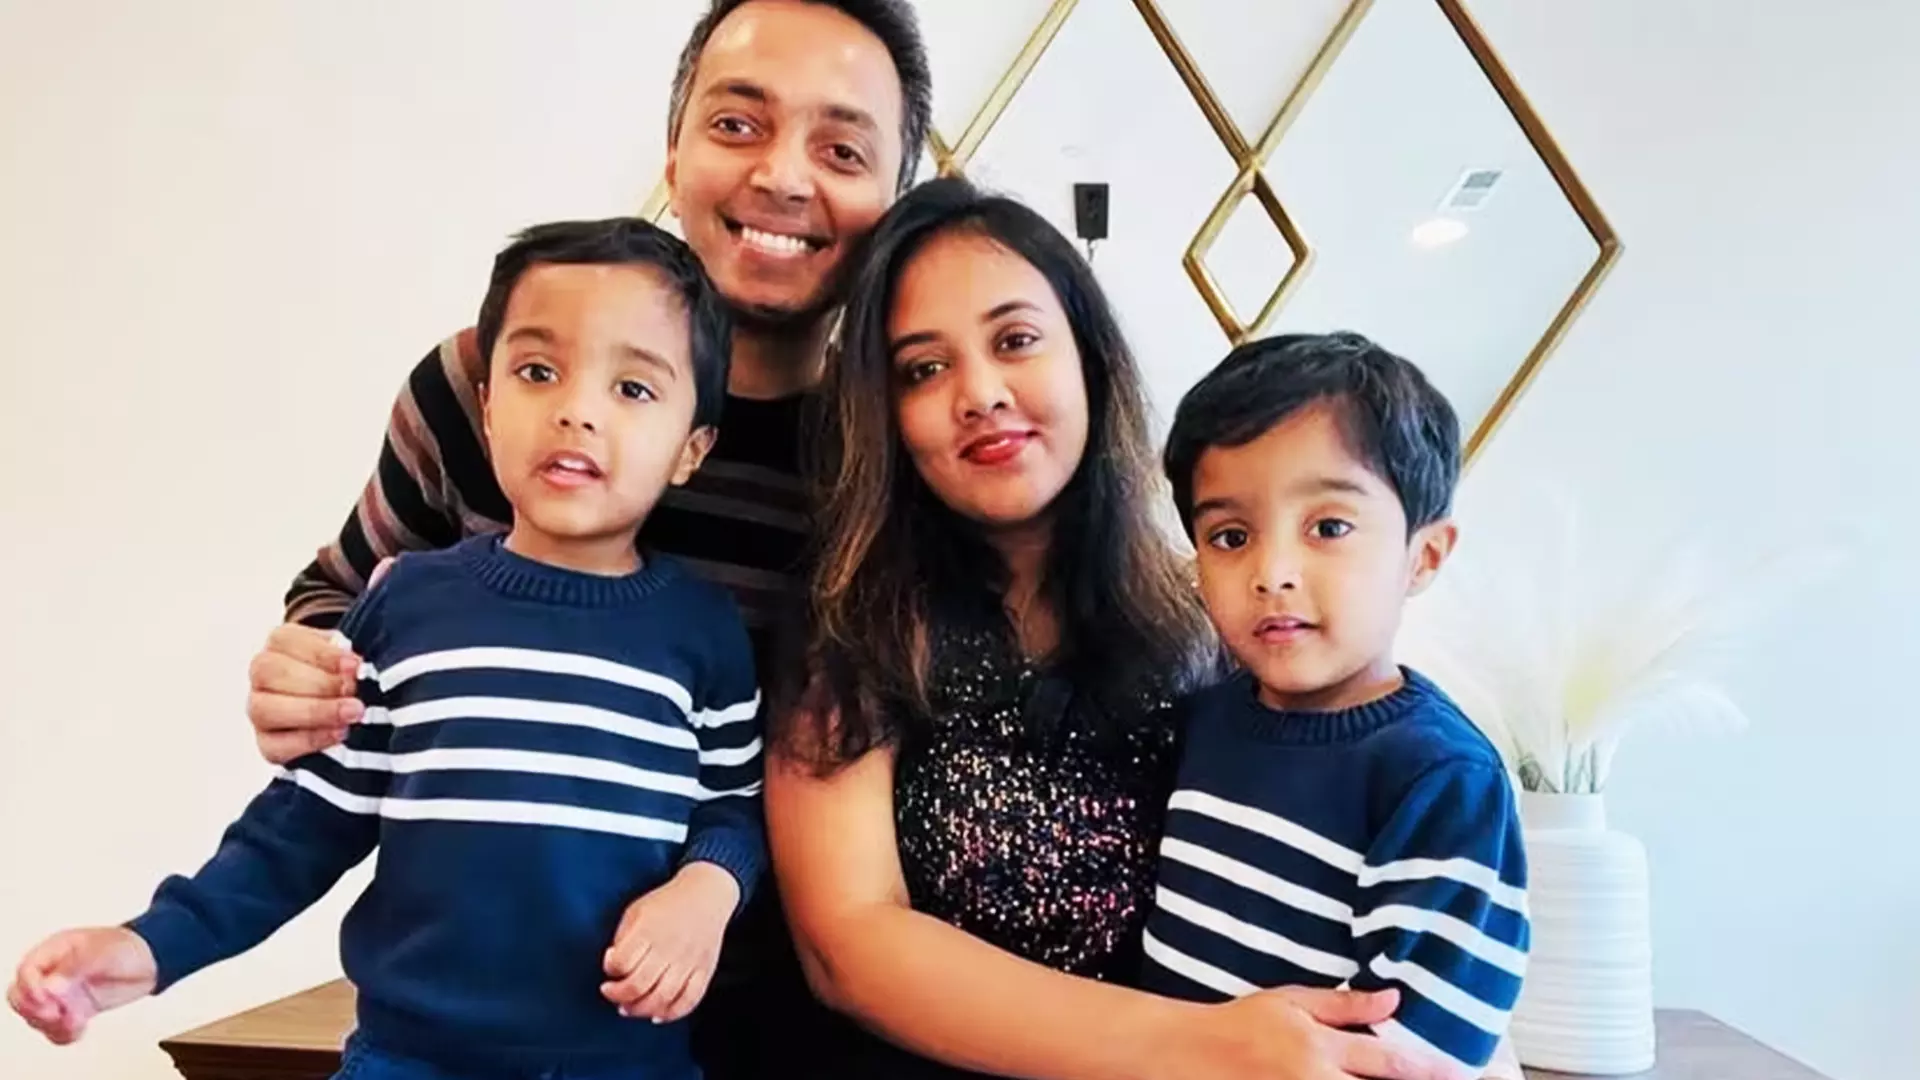 California | Family of 4 from Kerala found dead: Police suspect murder-suicide